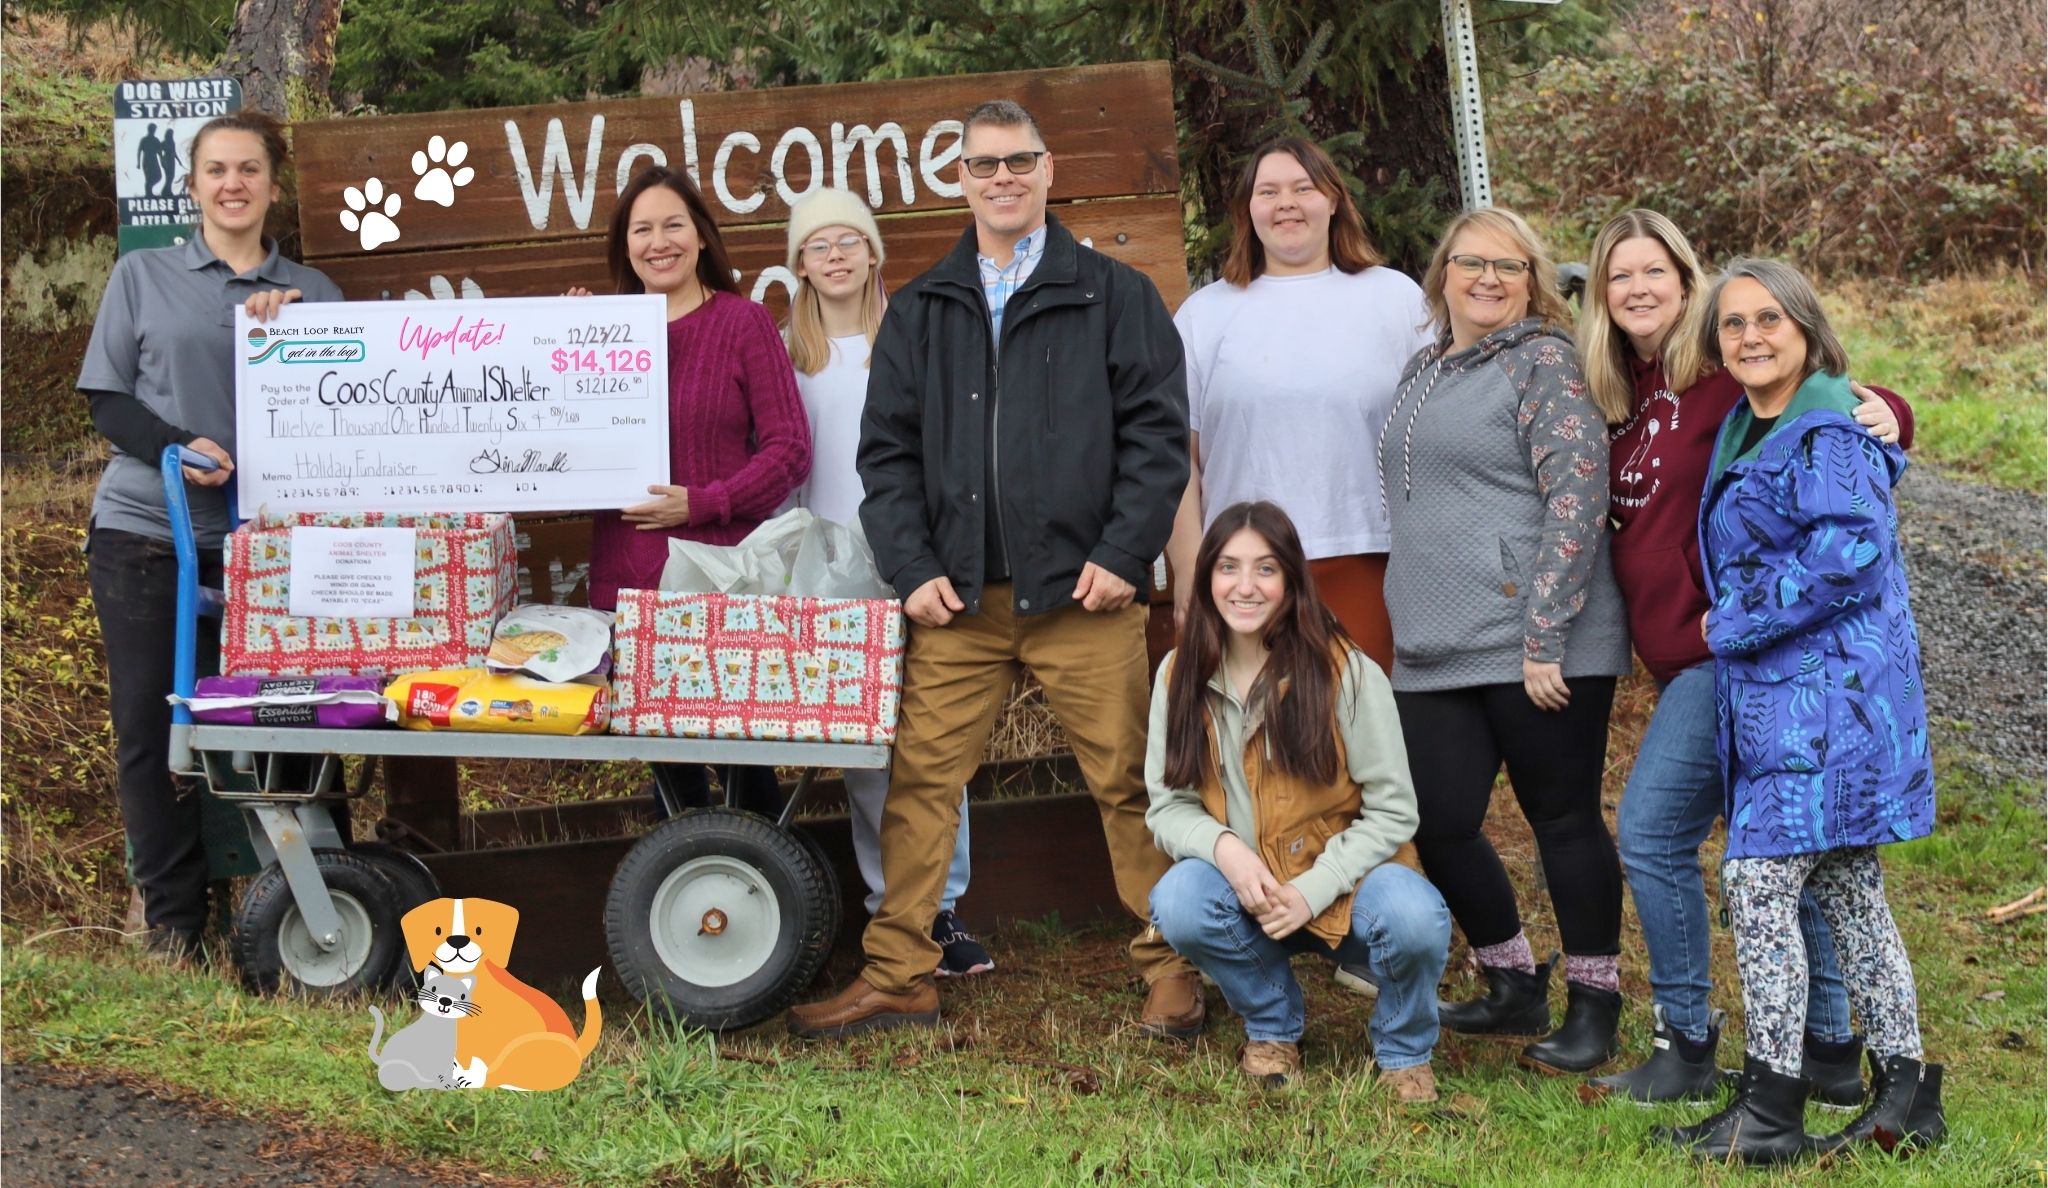 Beach Loop Realty and Coos County Animal Shelter